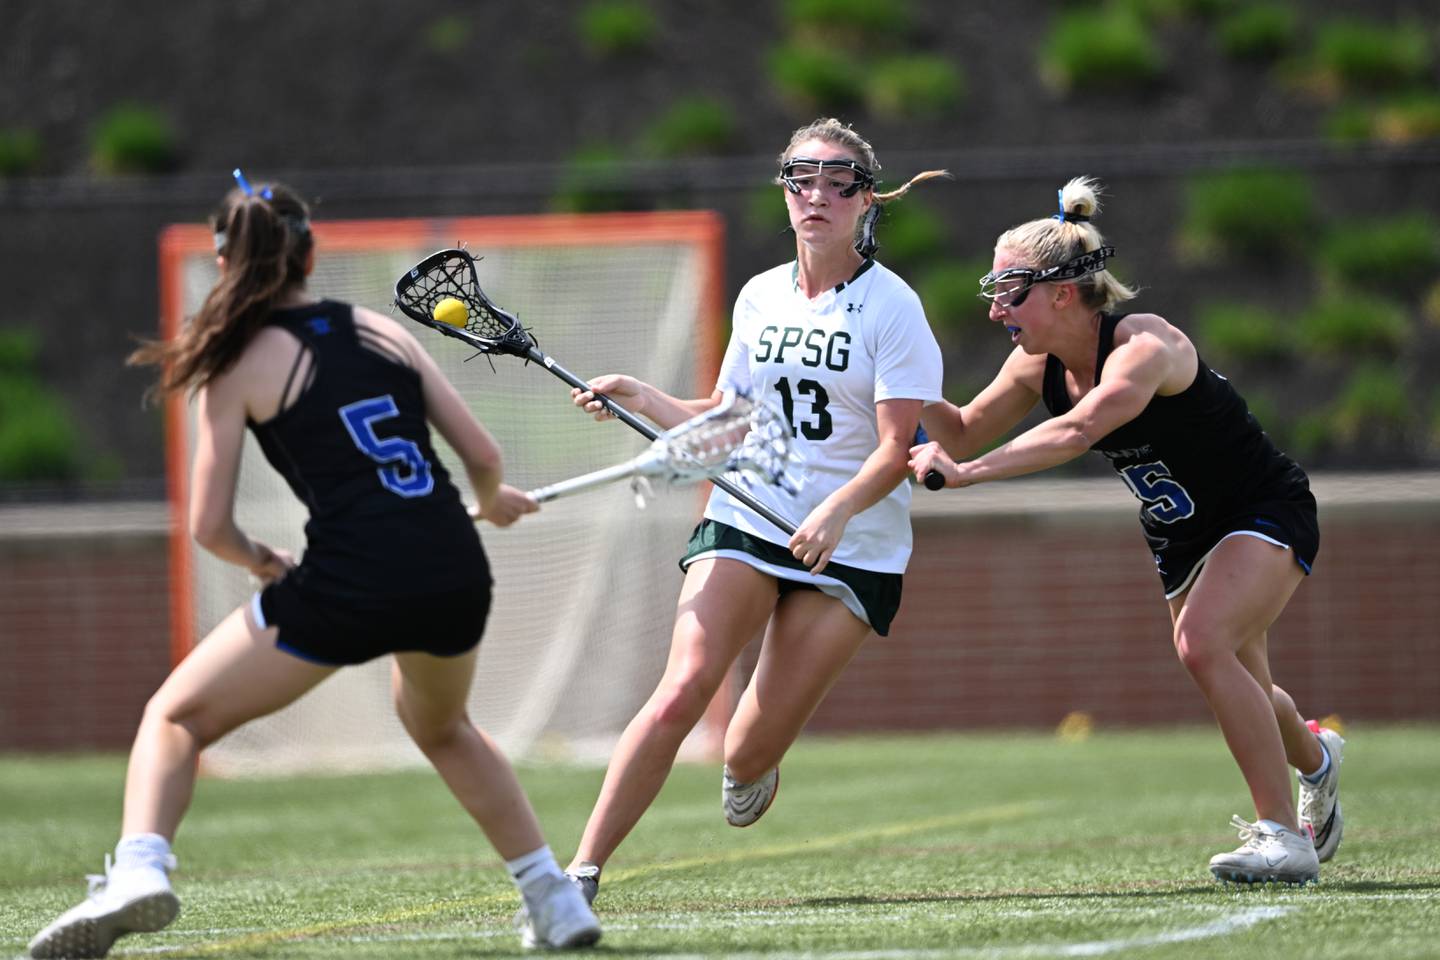 St. Pauls’ Natalie Shurheff charges between Darien’s Maggie Bellissiomo (5) and Kaci Benoit in the first half of a lacrosse game Saturday, April 15, 2023, in Sparks Glencoe, MD.